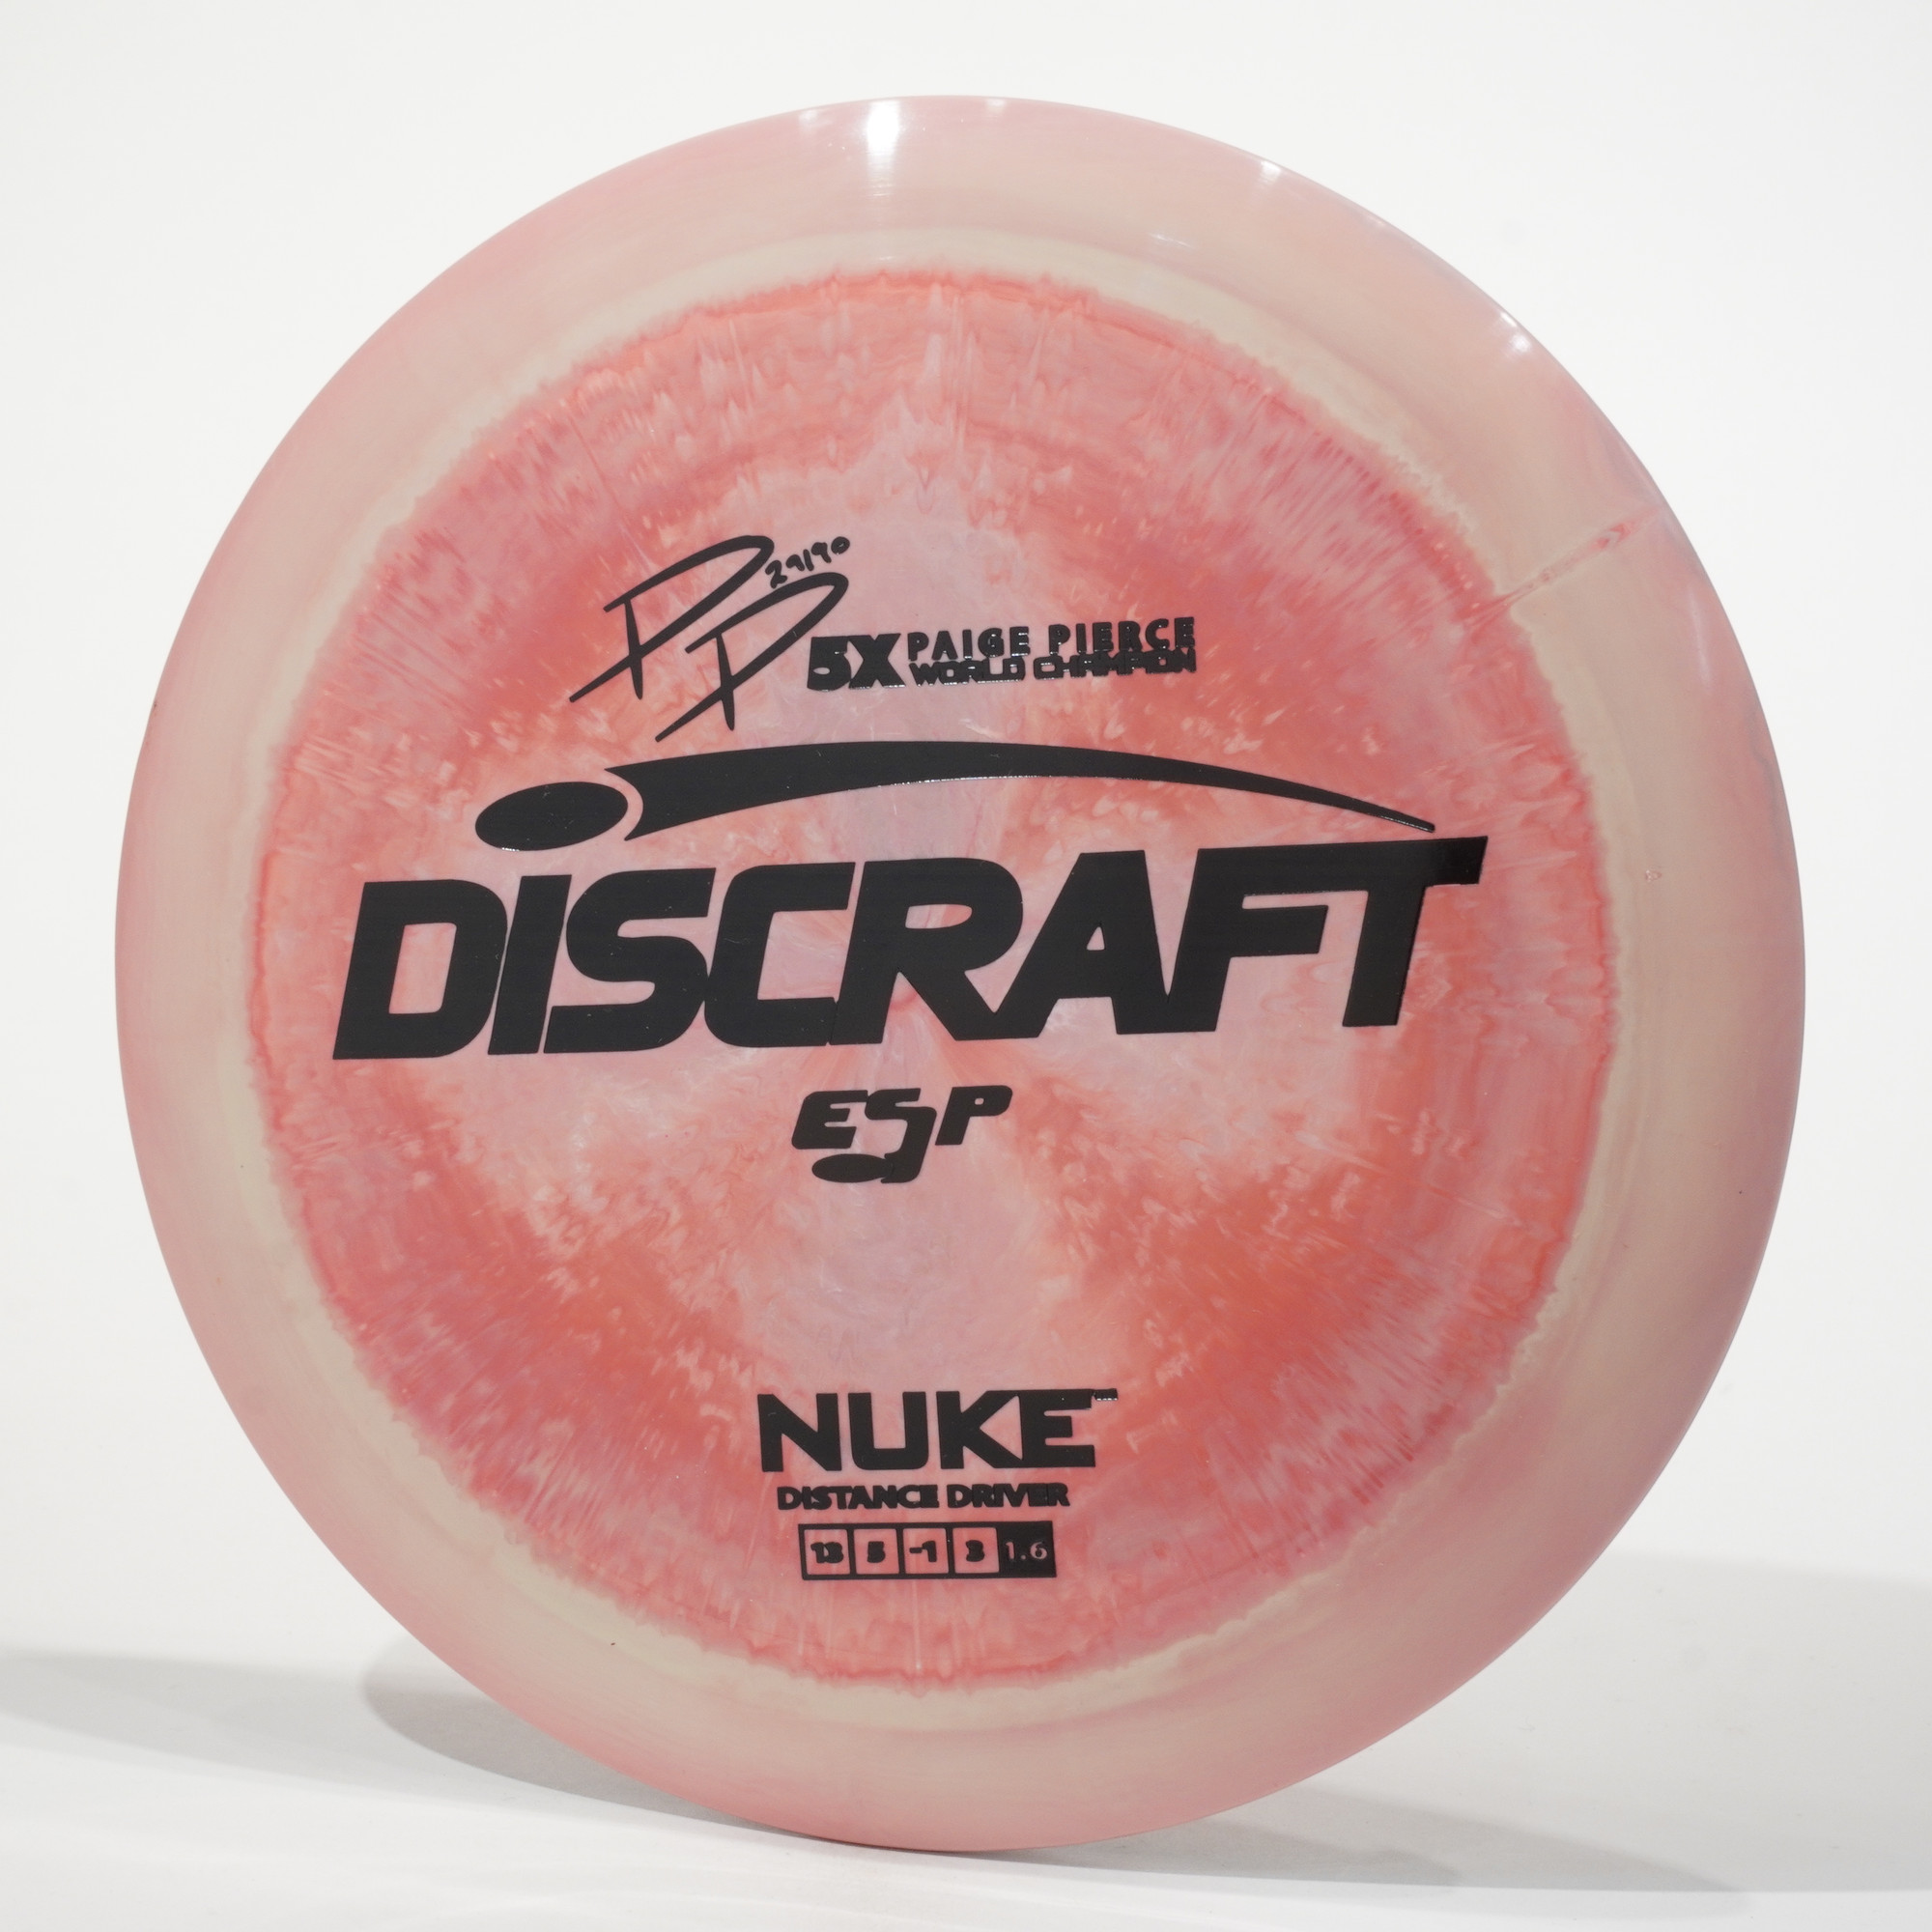 spyd afstemning forbruger Discraft Nuke (ESP) Paige Pierce 5x - THE WRIGHT LIFE ACTION SPORTING GOODS  STORE